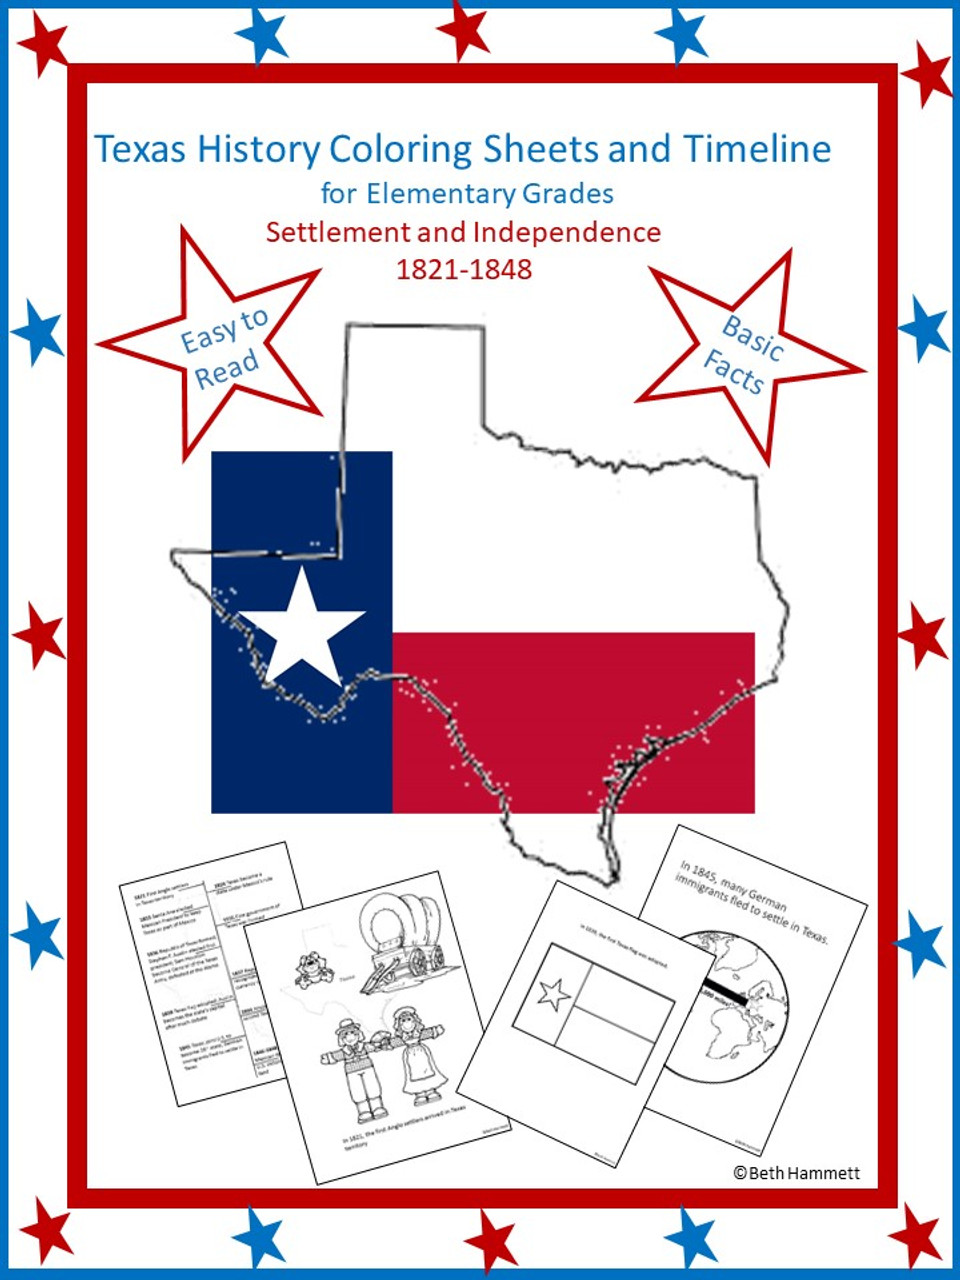 Texas History Coloring Sheets and Timeline (1821-1848)